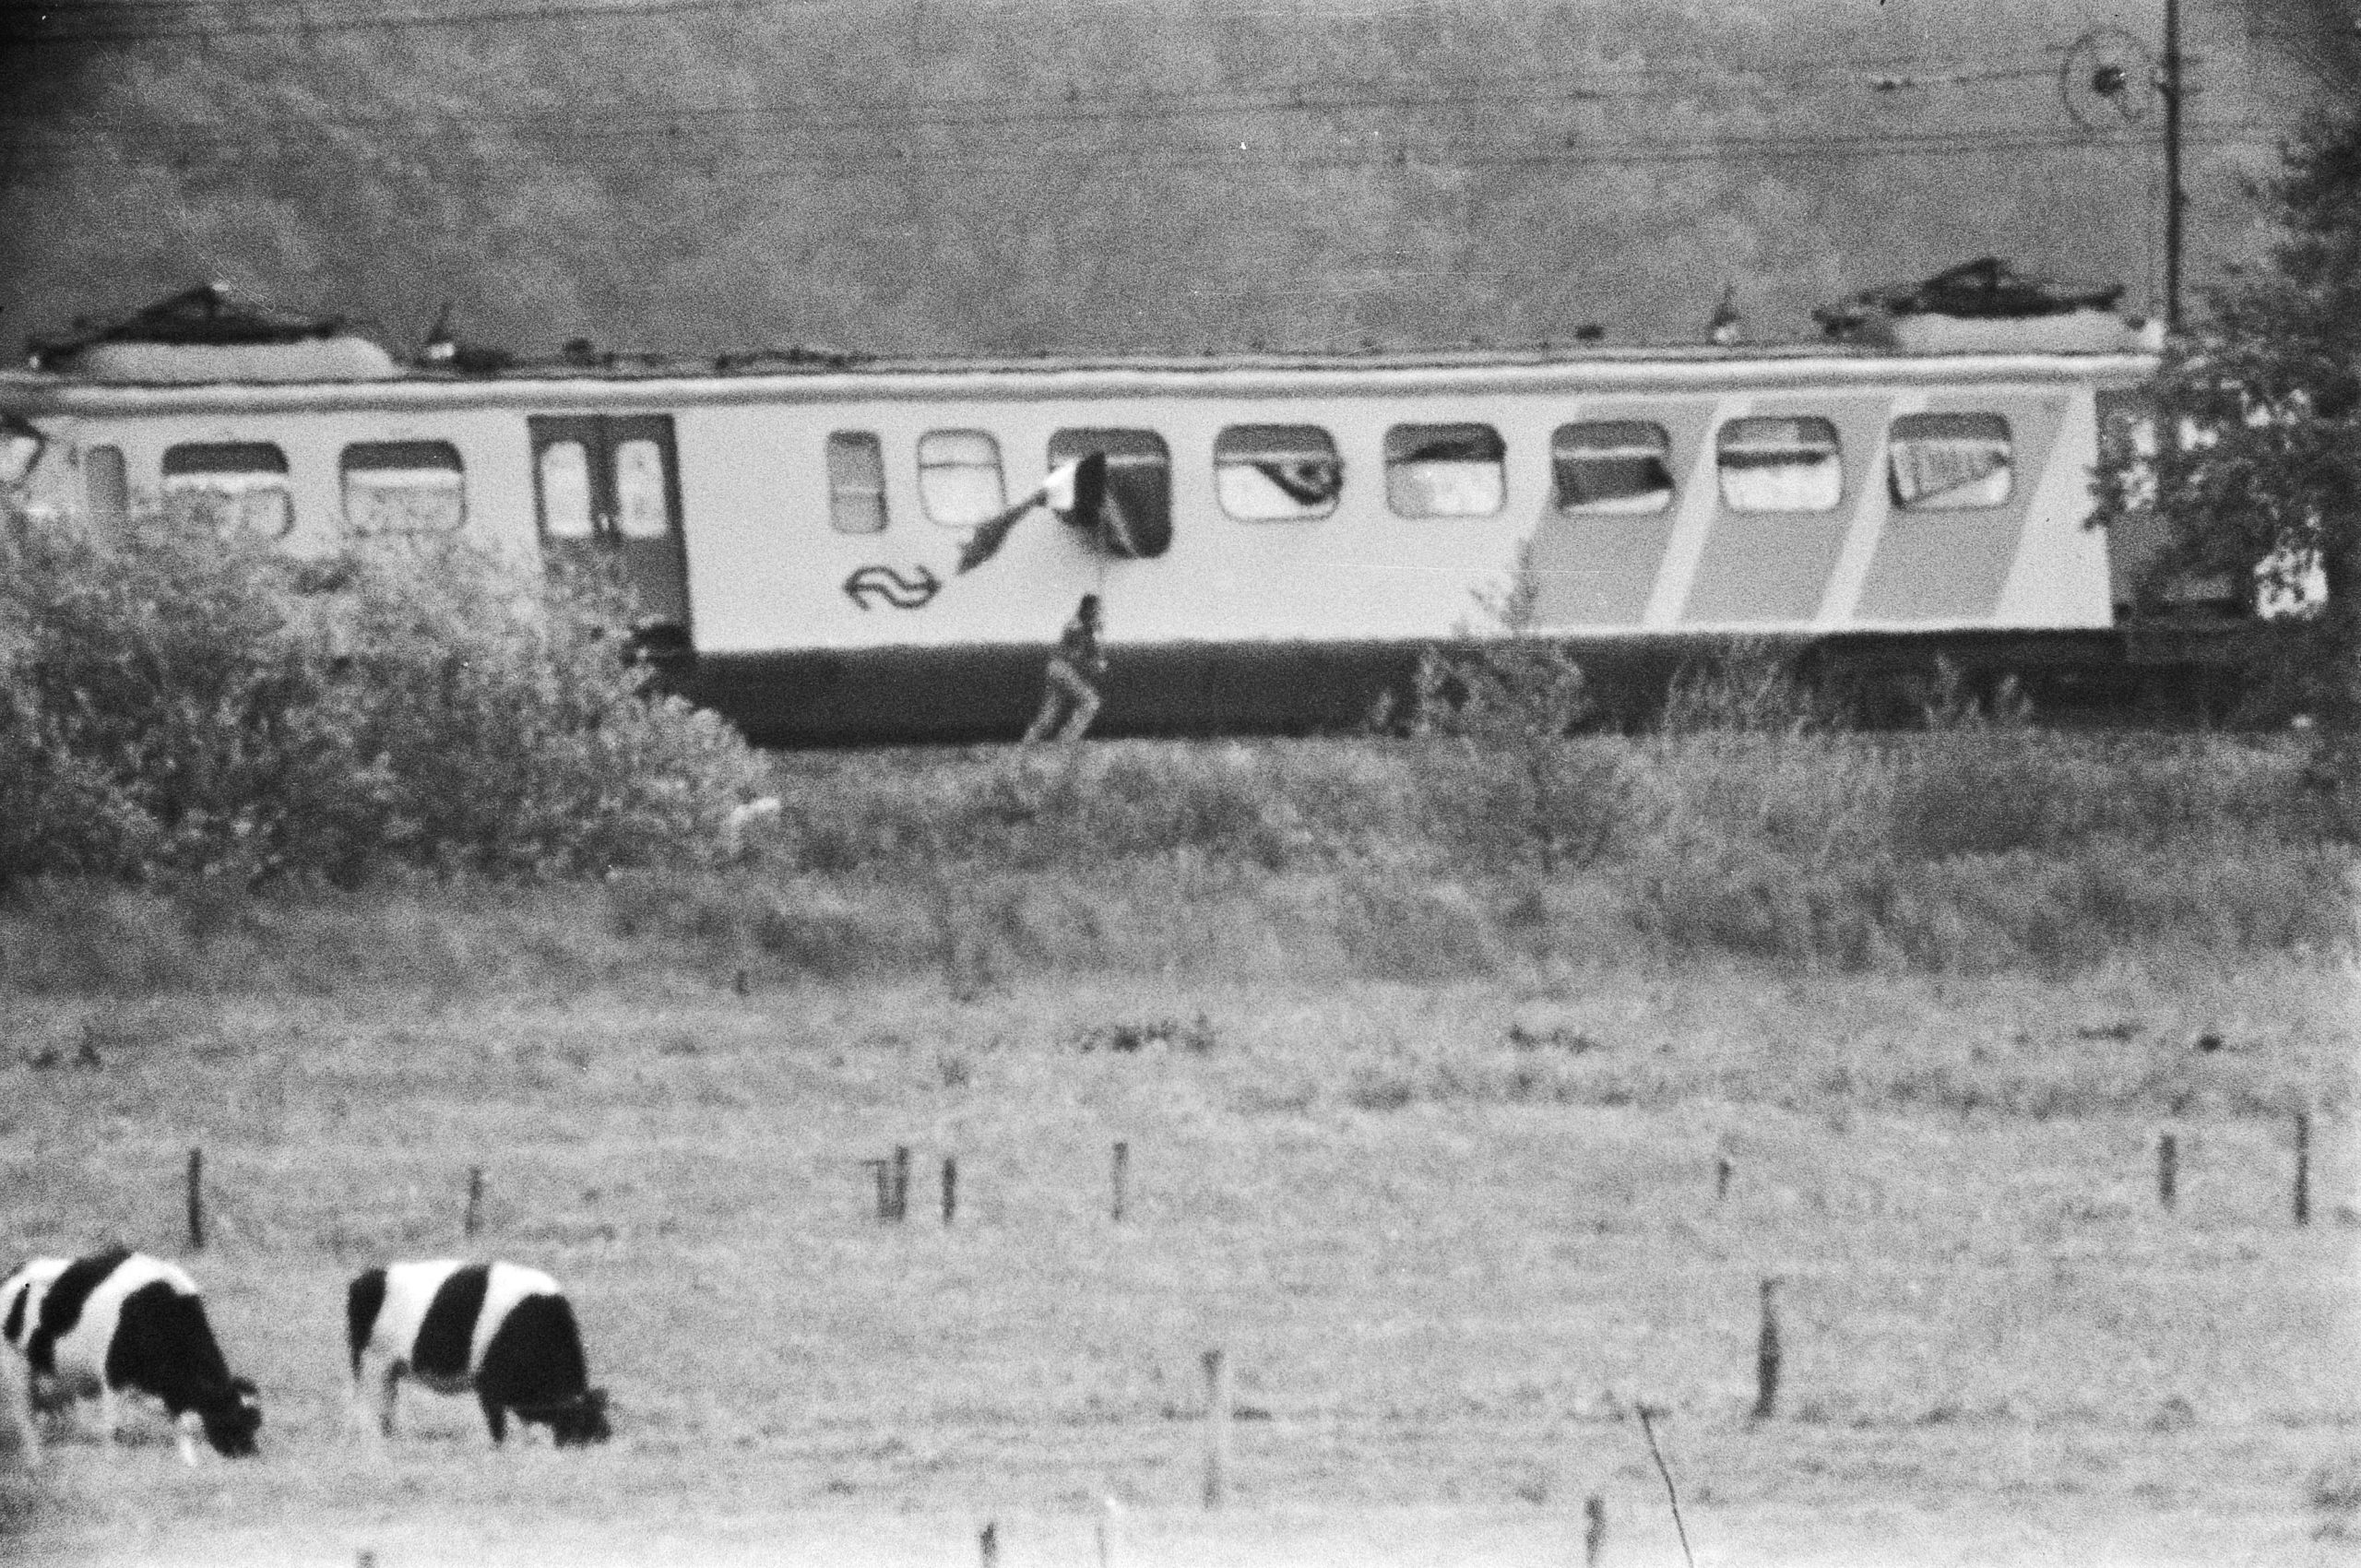 Train tipped sideways behind a cattle farm, one person standing outside the train holding a flag.